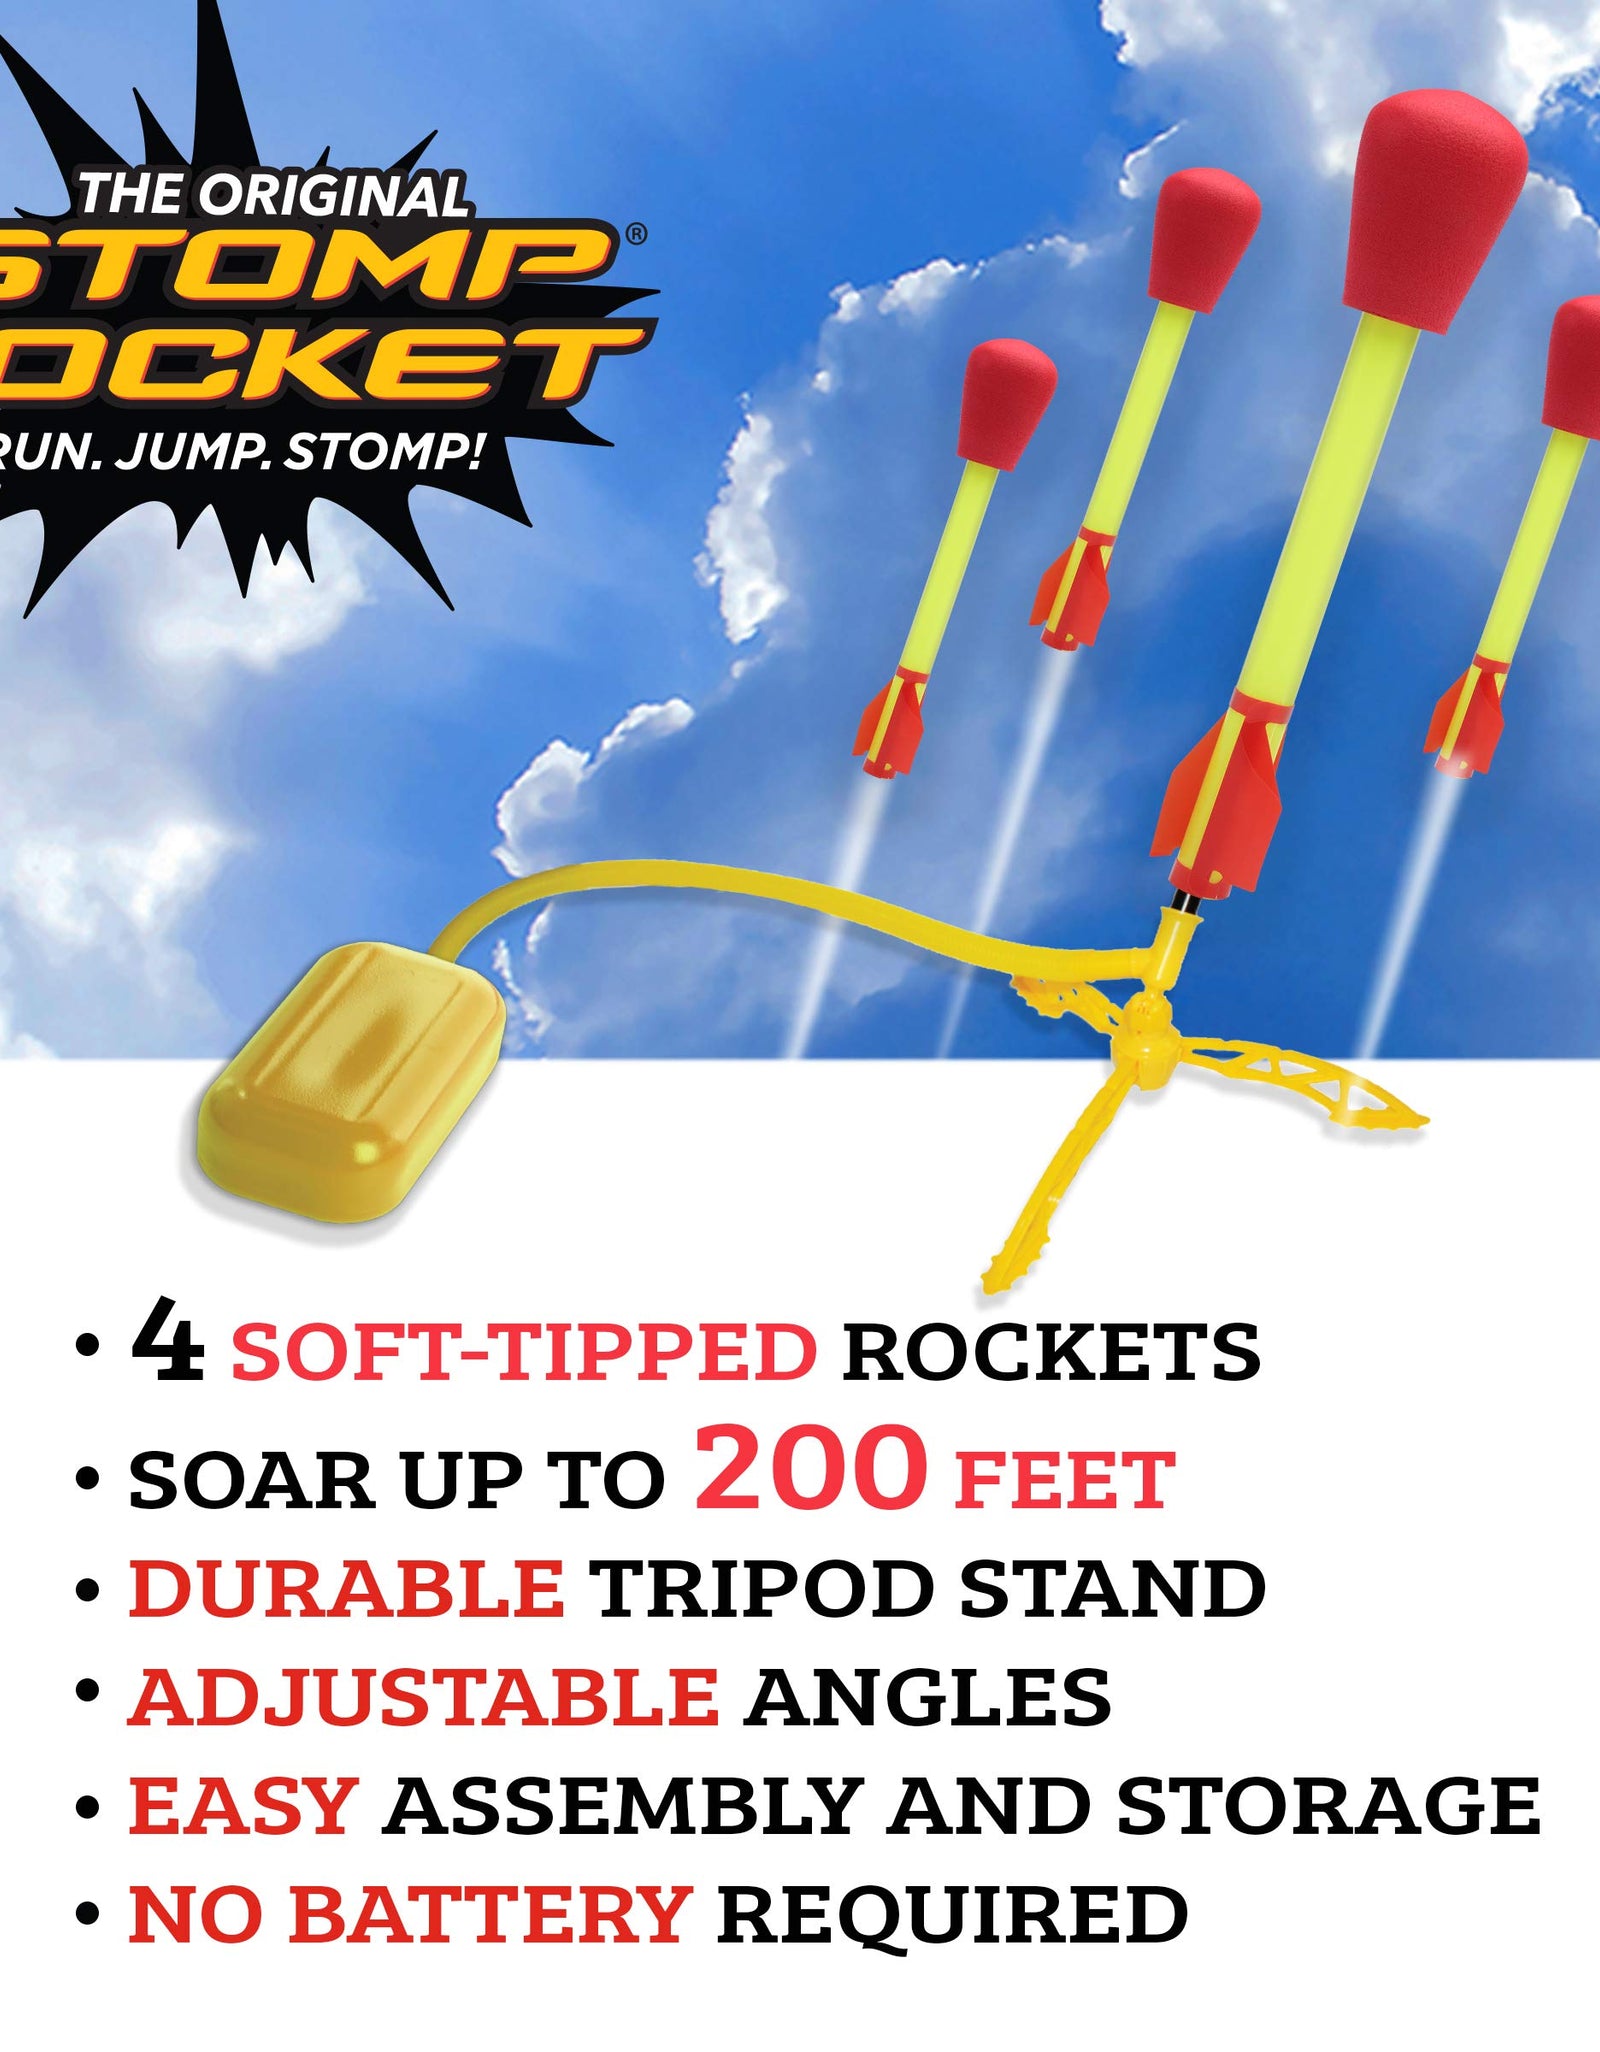 The Original Stomp Rocket Ultra Rocket Launcher, 4 Rockets and Toy Air Rocket Launcher - Outdoor Rocket STEM Gift for Boys and Girls Ages 5 Years and Up - Great for Outdoor Play